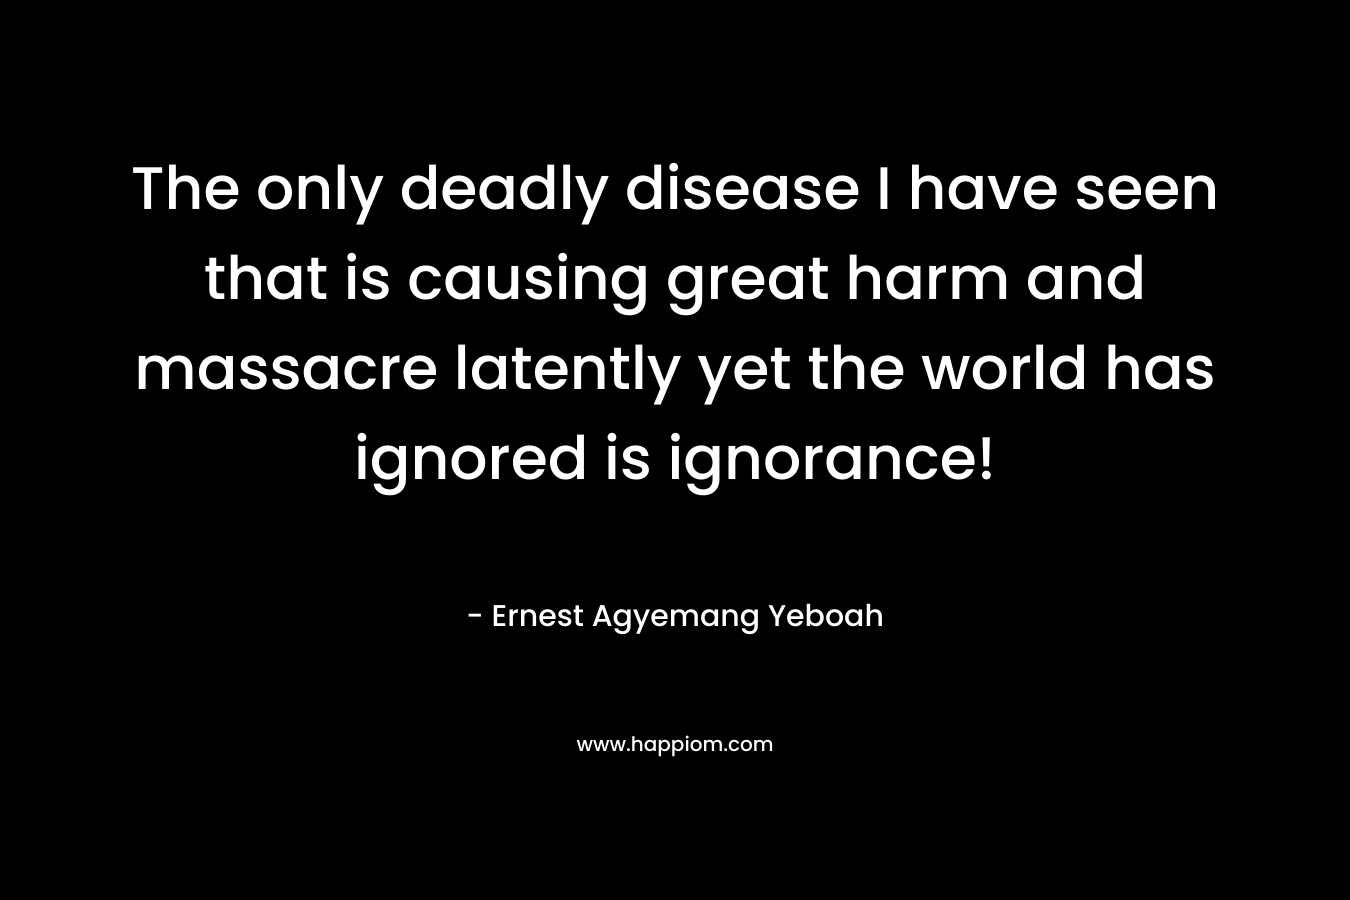 The only deadly disease I have seen that is causing great harm and massacre latently yet the world has ignored is ignorance!